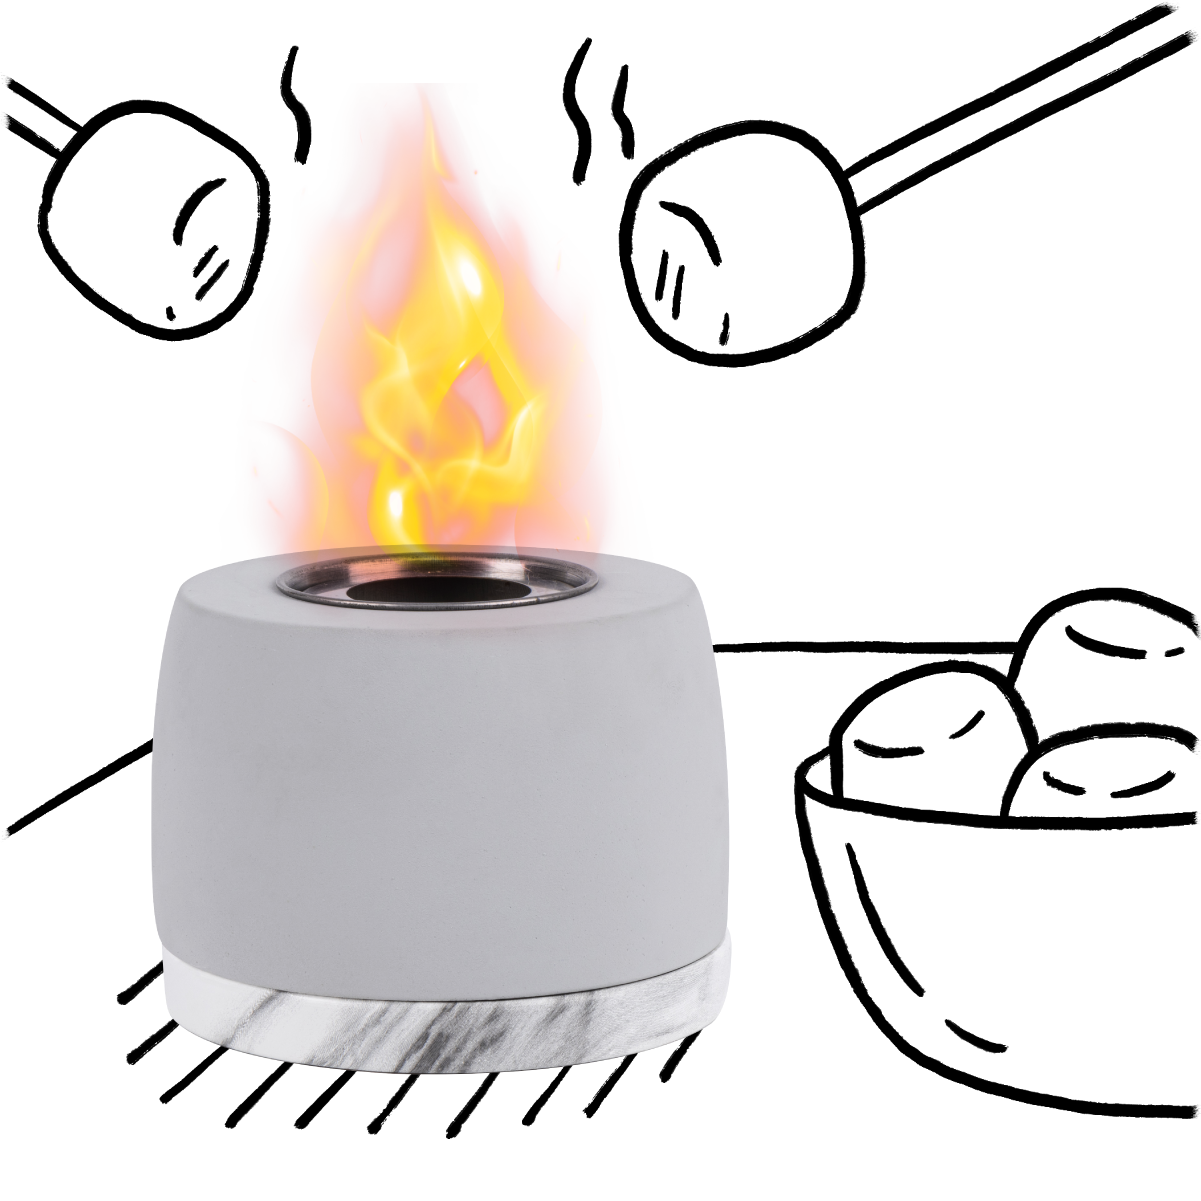 gray tabletop fire pit with black line illustration of hovering marshmallow over flames 